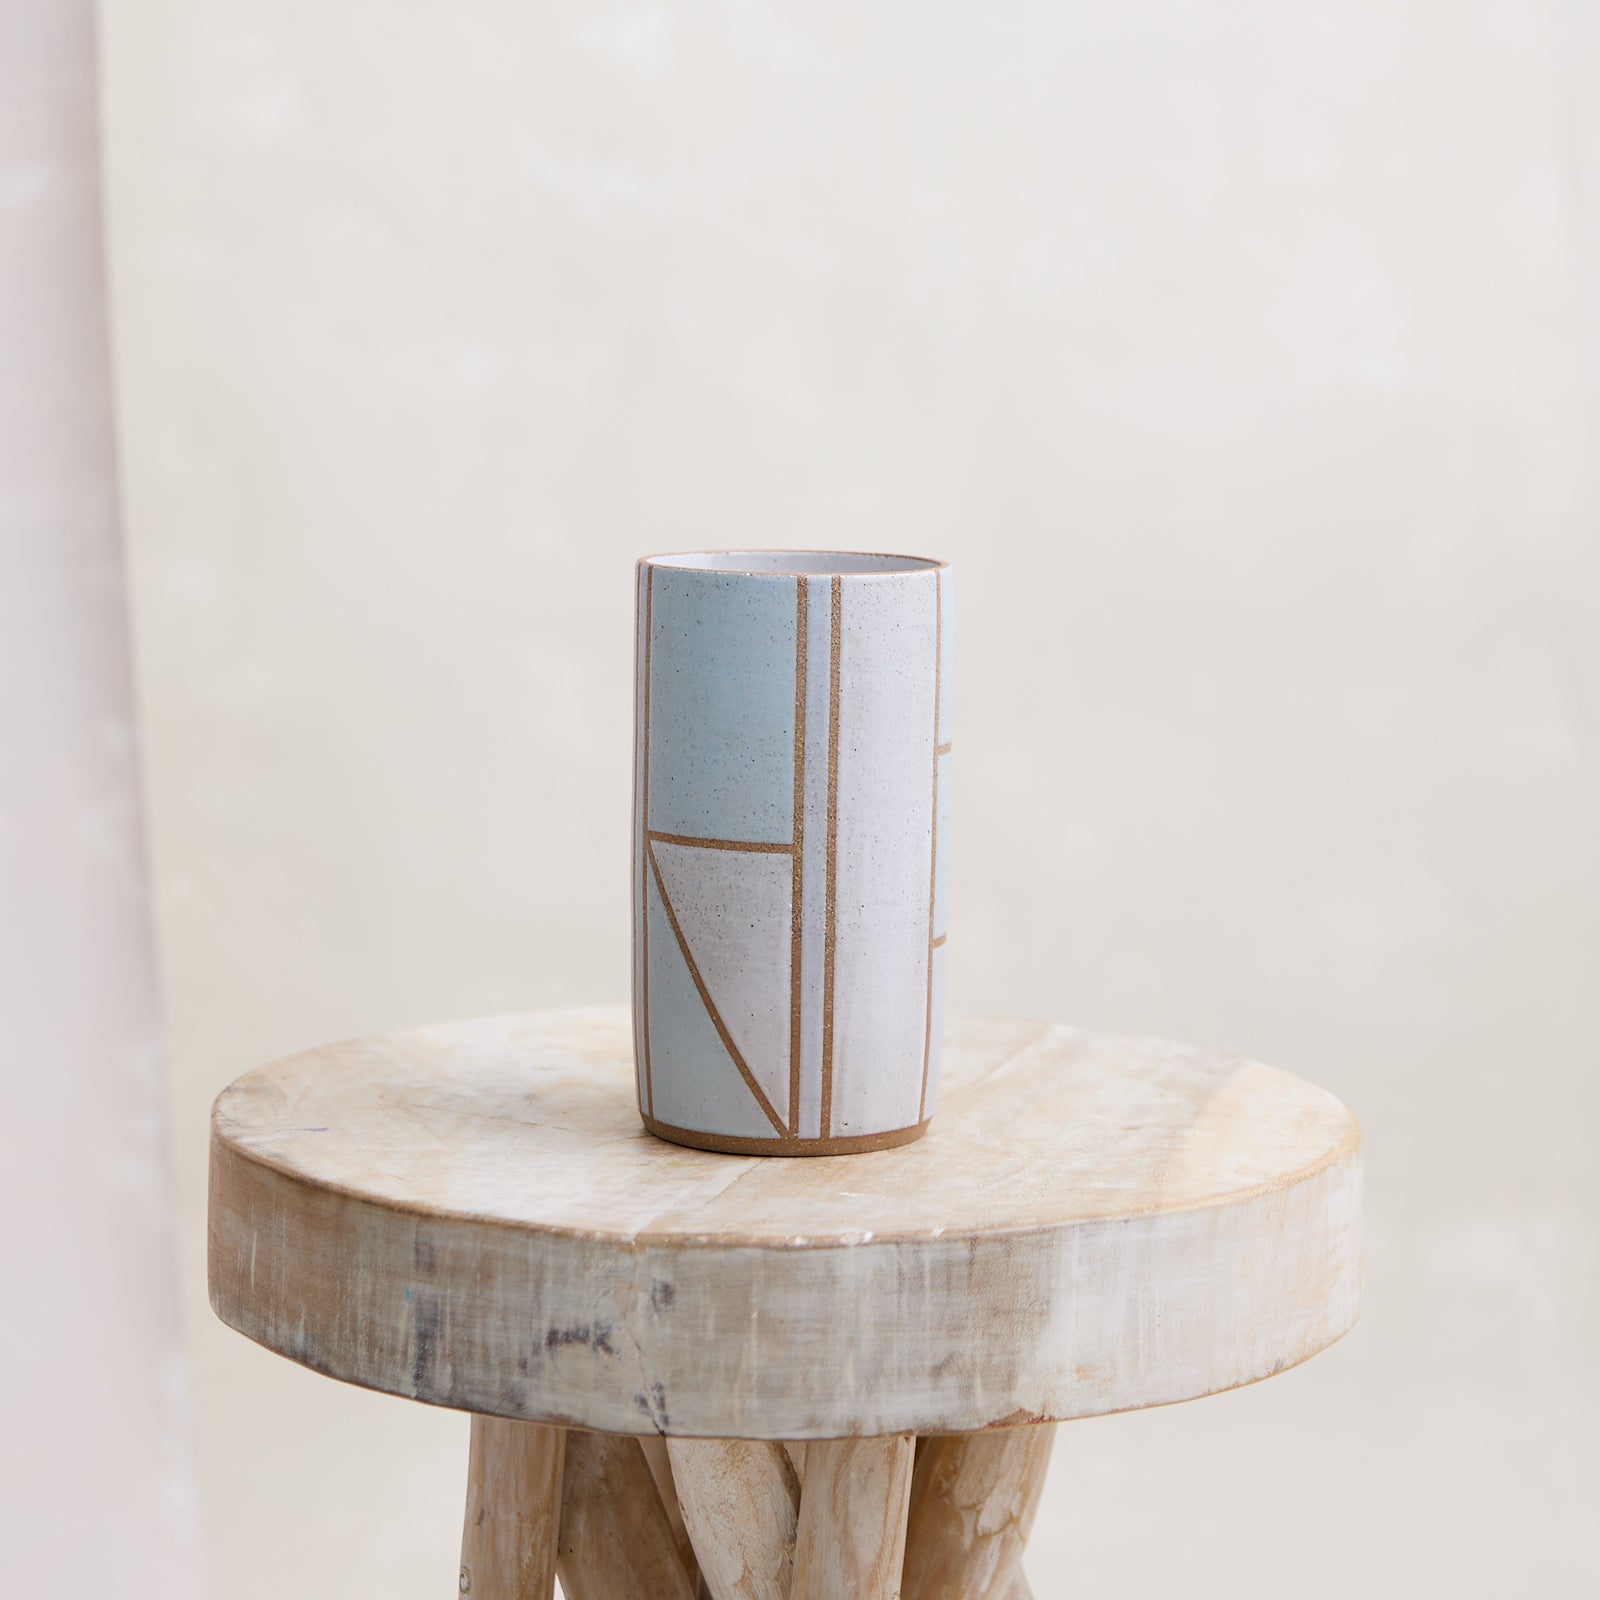 A front view of the Geometric Cylindrical Handmade Ceramic Vase in a blue, white and grey glaze. The handmade vase sits on a wooden stool in a coastal-styled setting. The vase has is cylindrical with a geometric design.